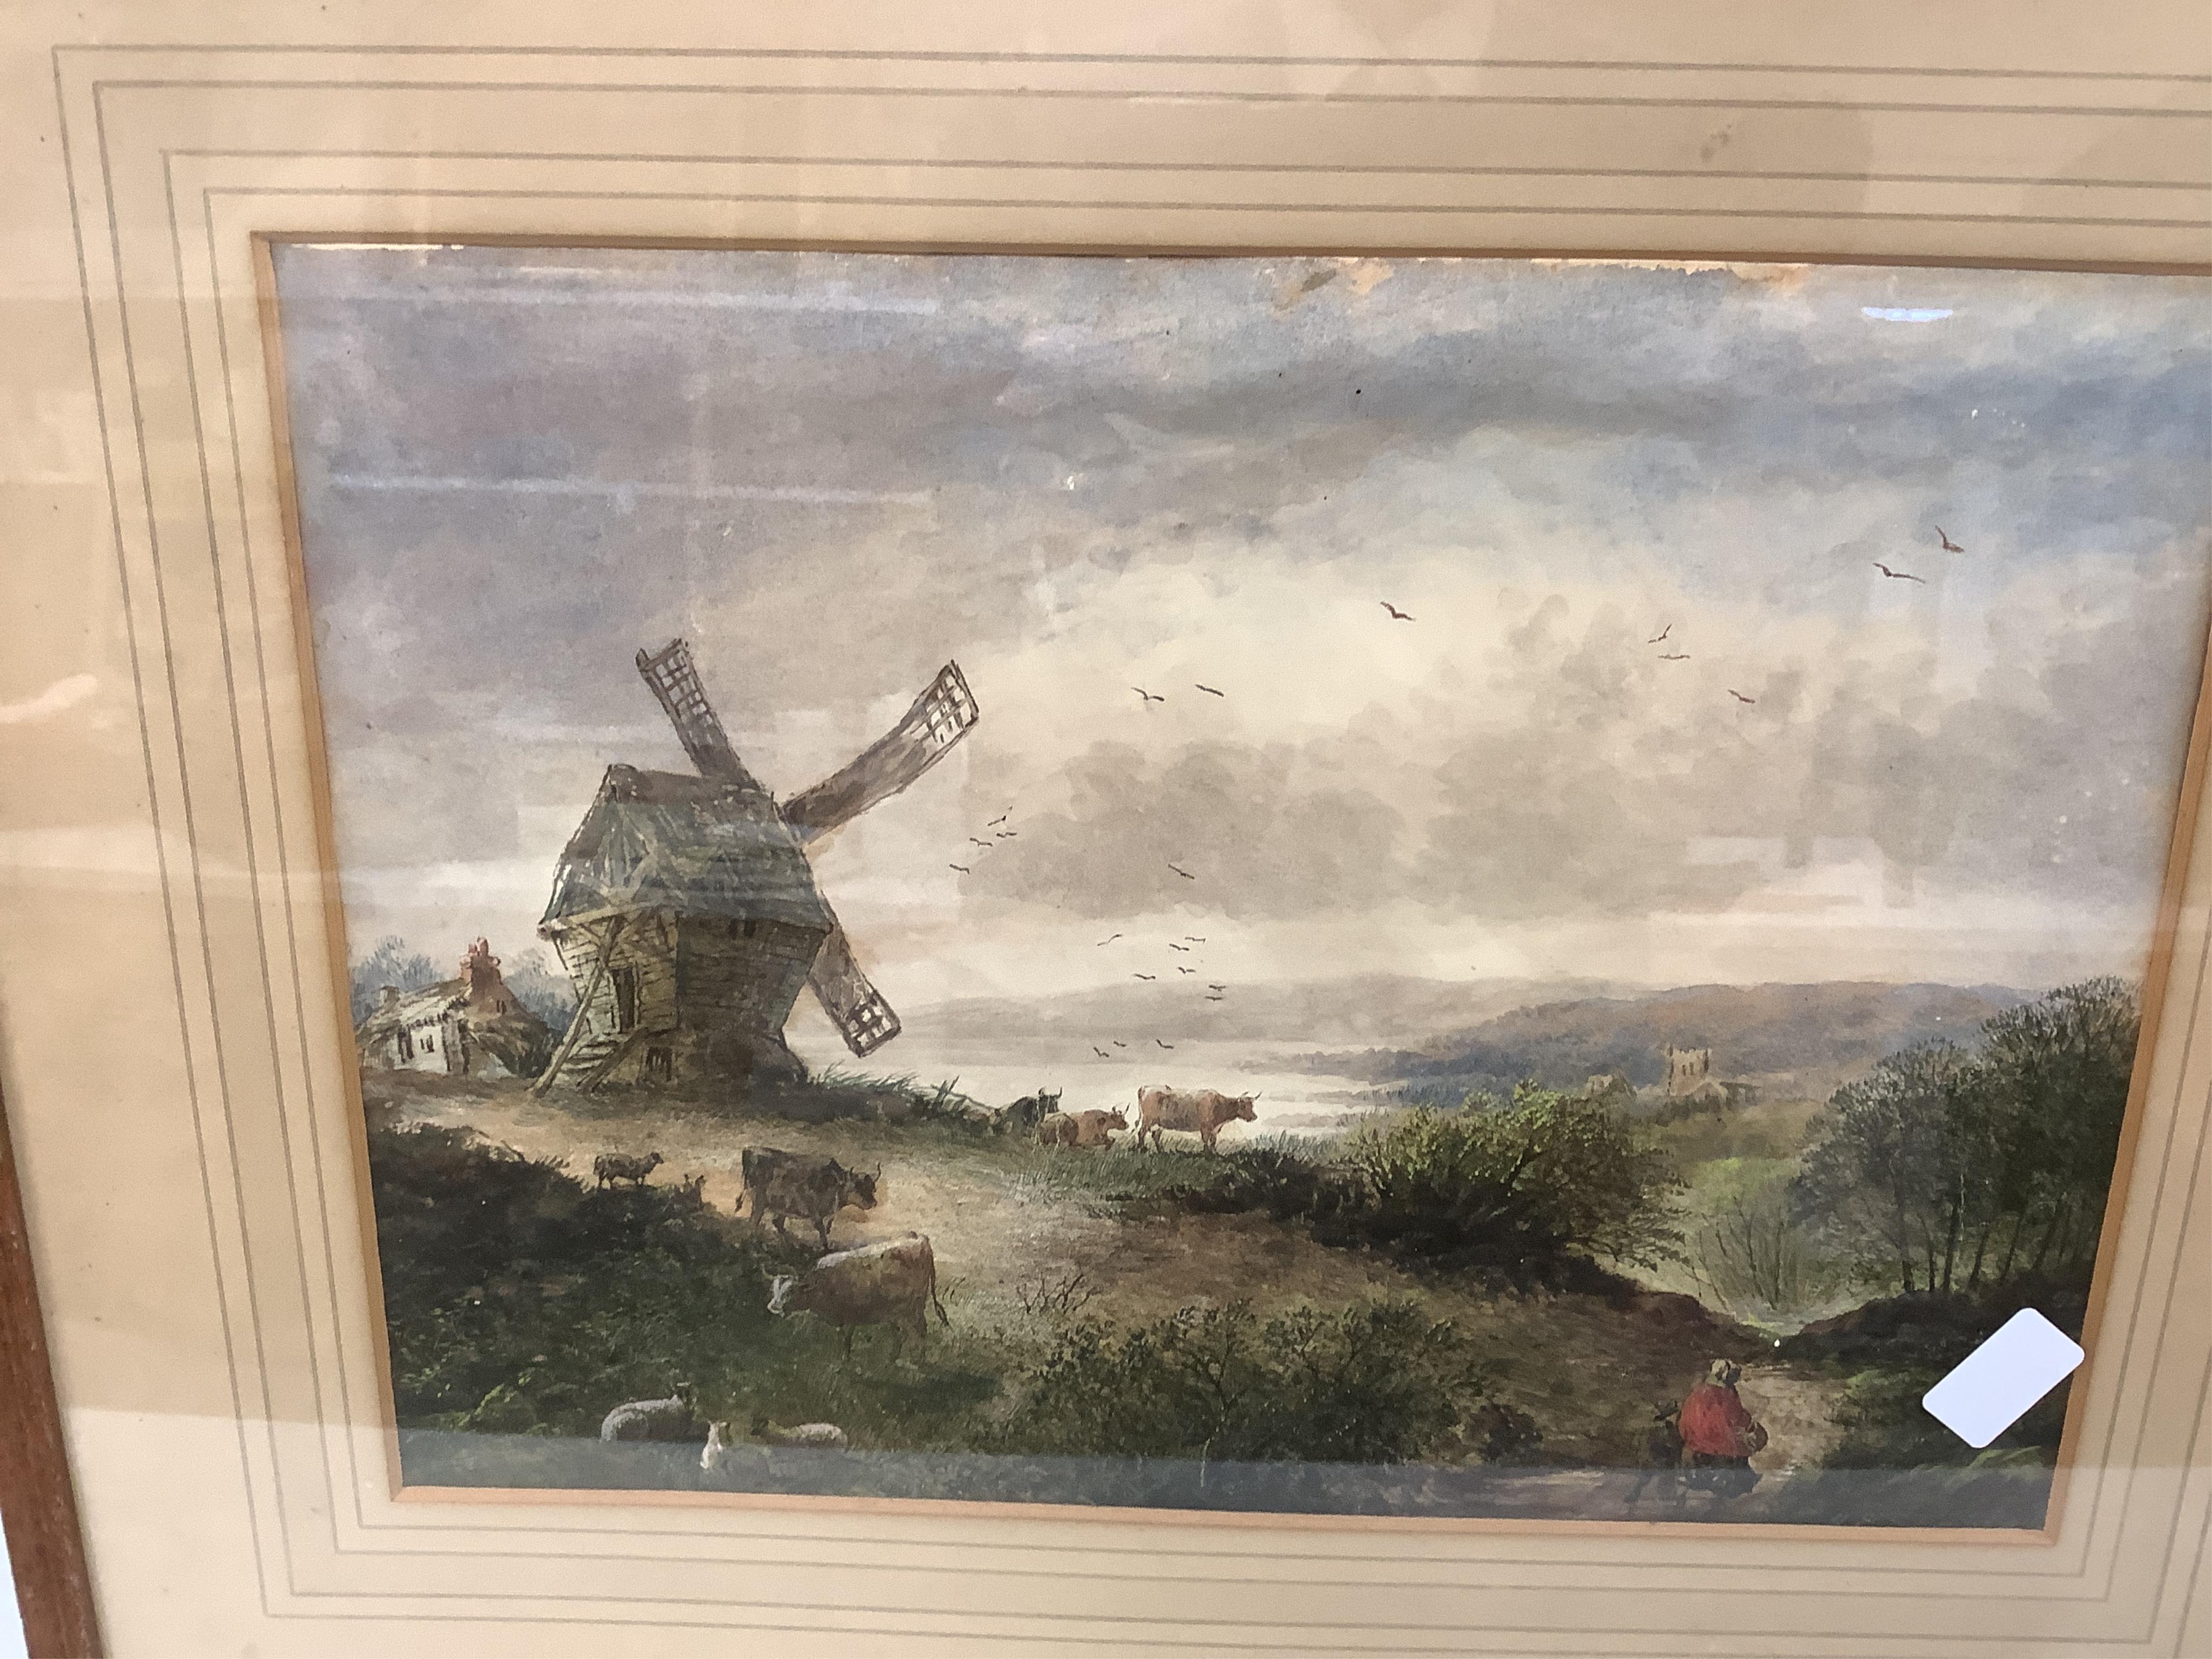 A collection of seven 19th century watercolour paintings to include, by - T.S Robins - ‘’Fishing boats in a choppy sea, signed; C.F. Buckley, 'Dove Dale, Derbyshire’, signed; Hercules Brabazon Brabazon, 'Fishing boats at